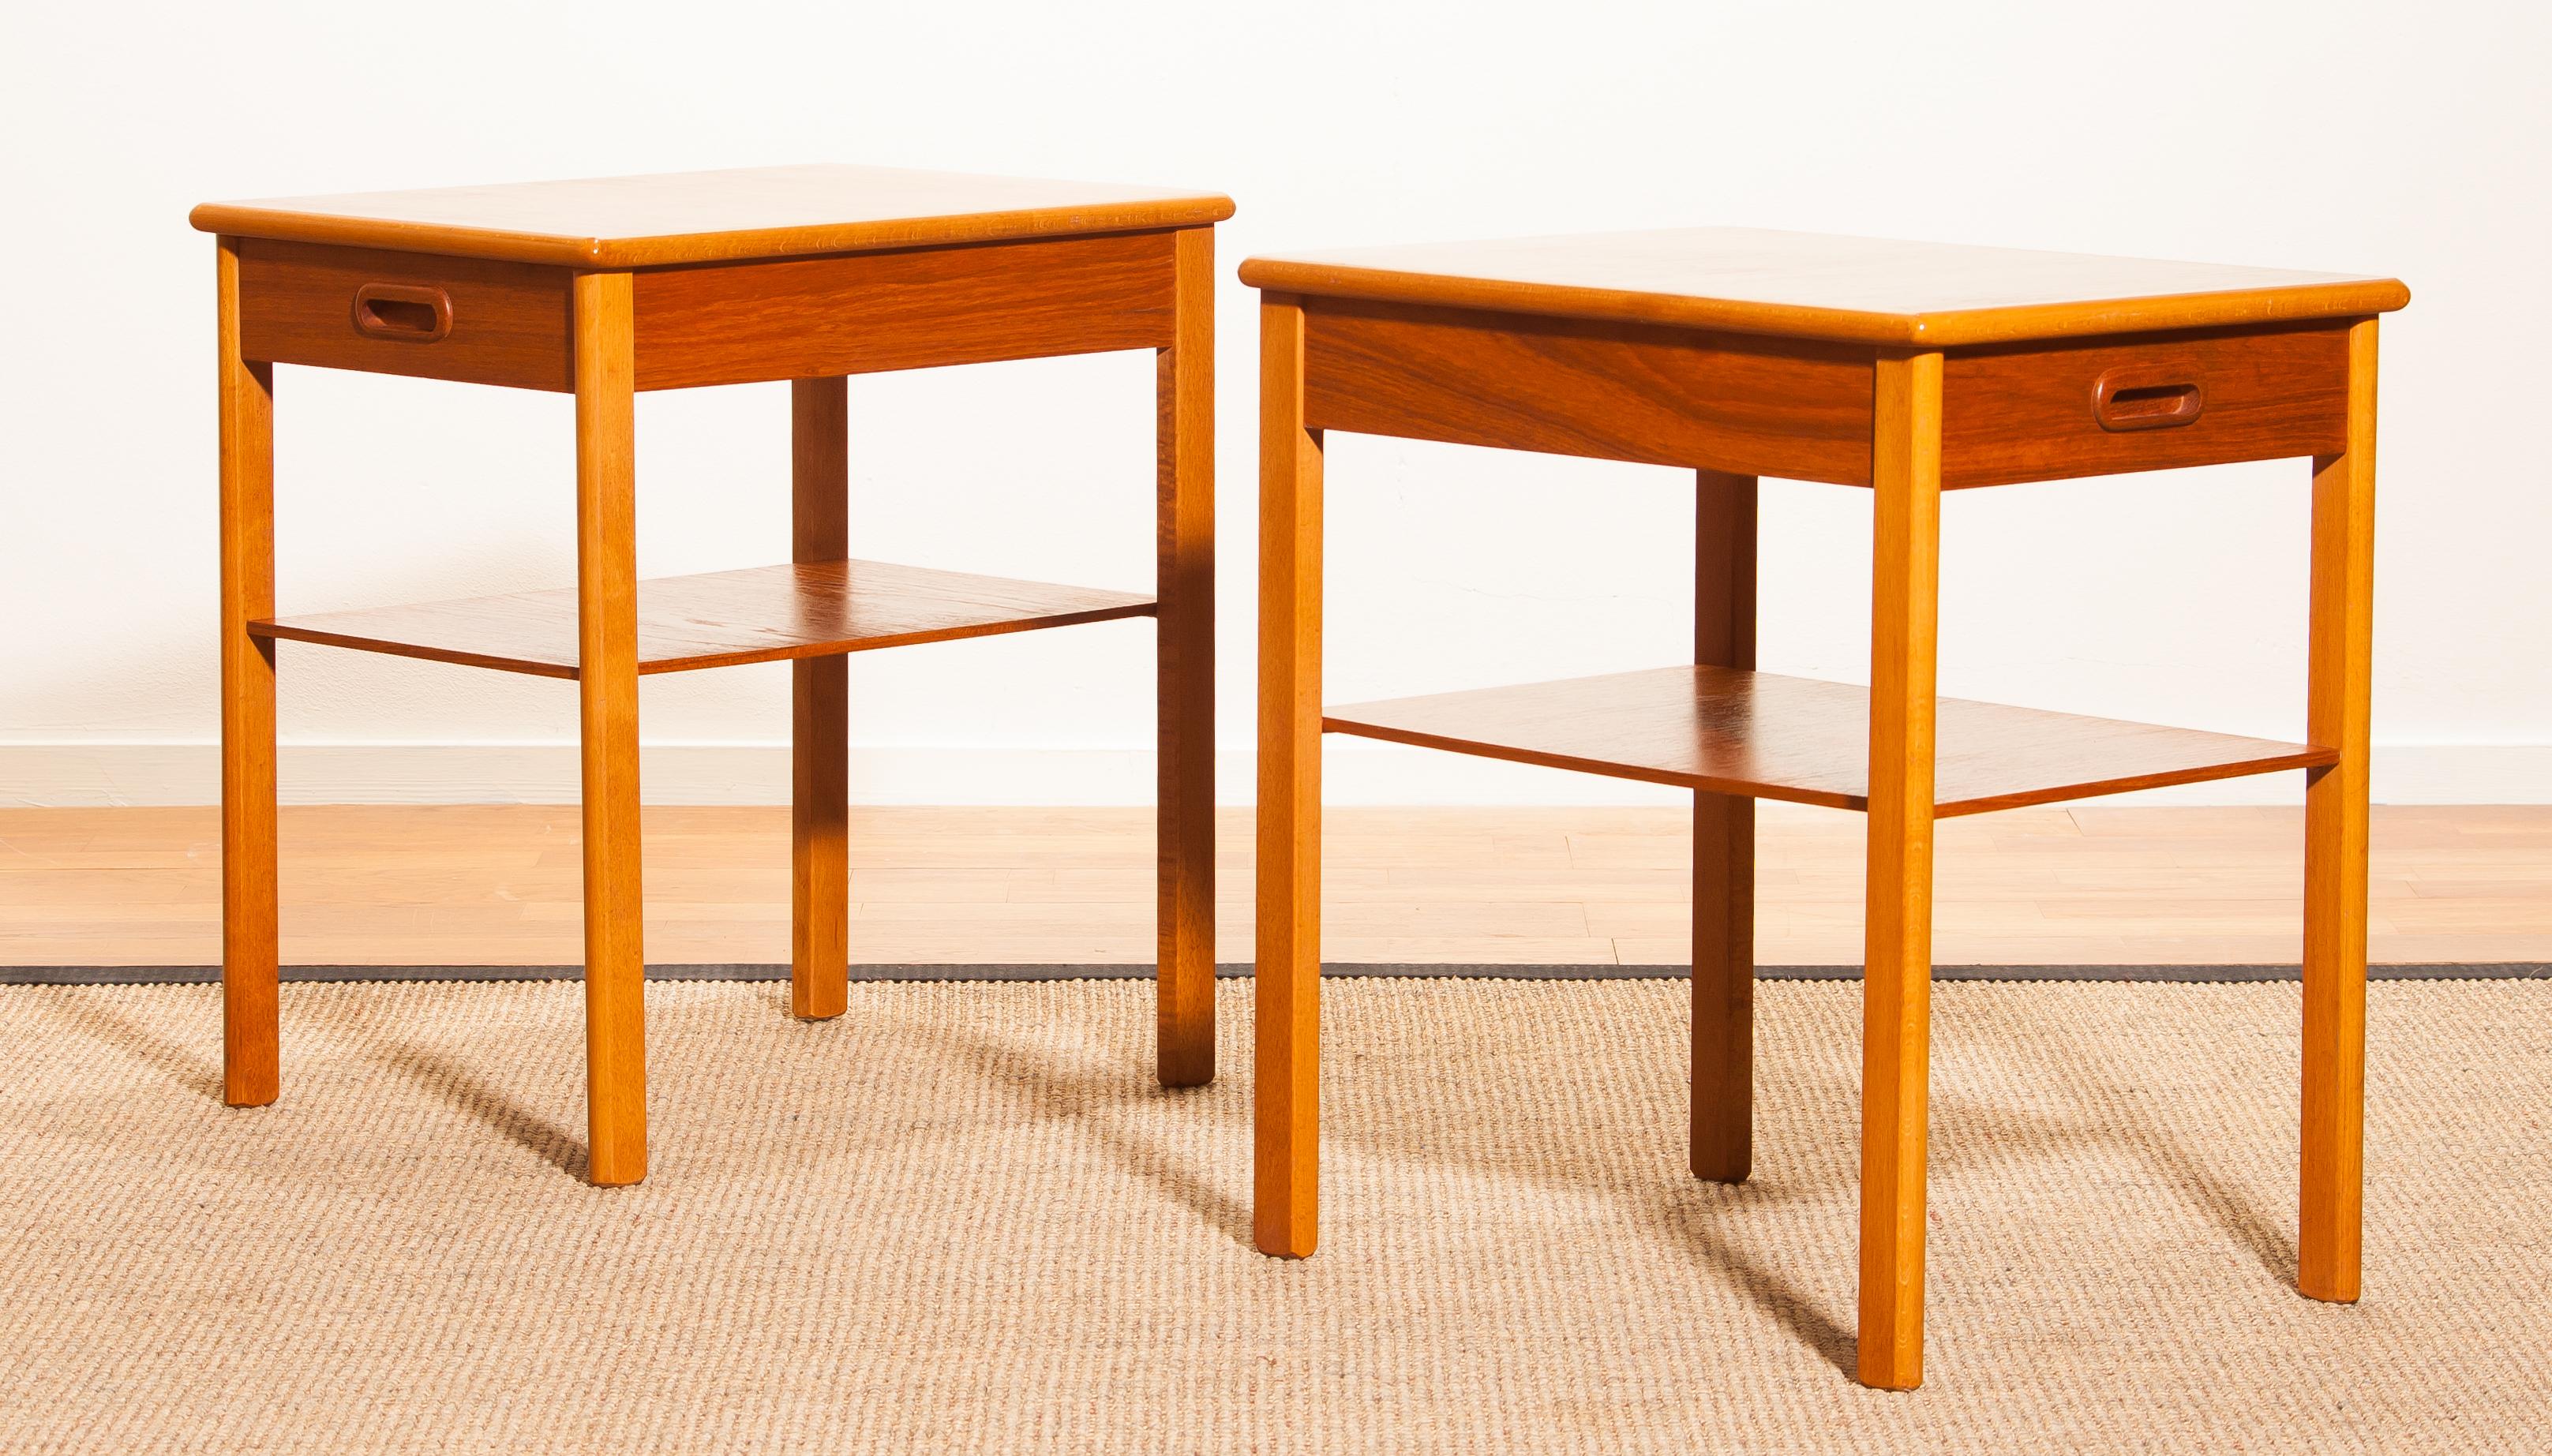 Beautiful pair of bedside tables by Säffle, Sweden.
These tables are made of teak and they have a drawer.
They are in very nice condition.
Period, 1950s
Dimensions: H.52 cm, W.36 cm, D.48 cm.